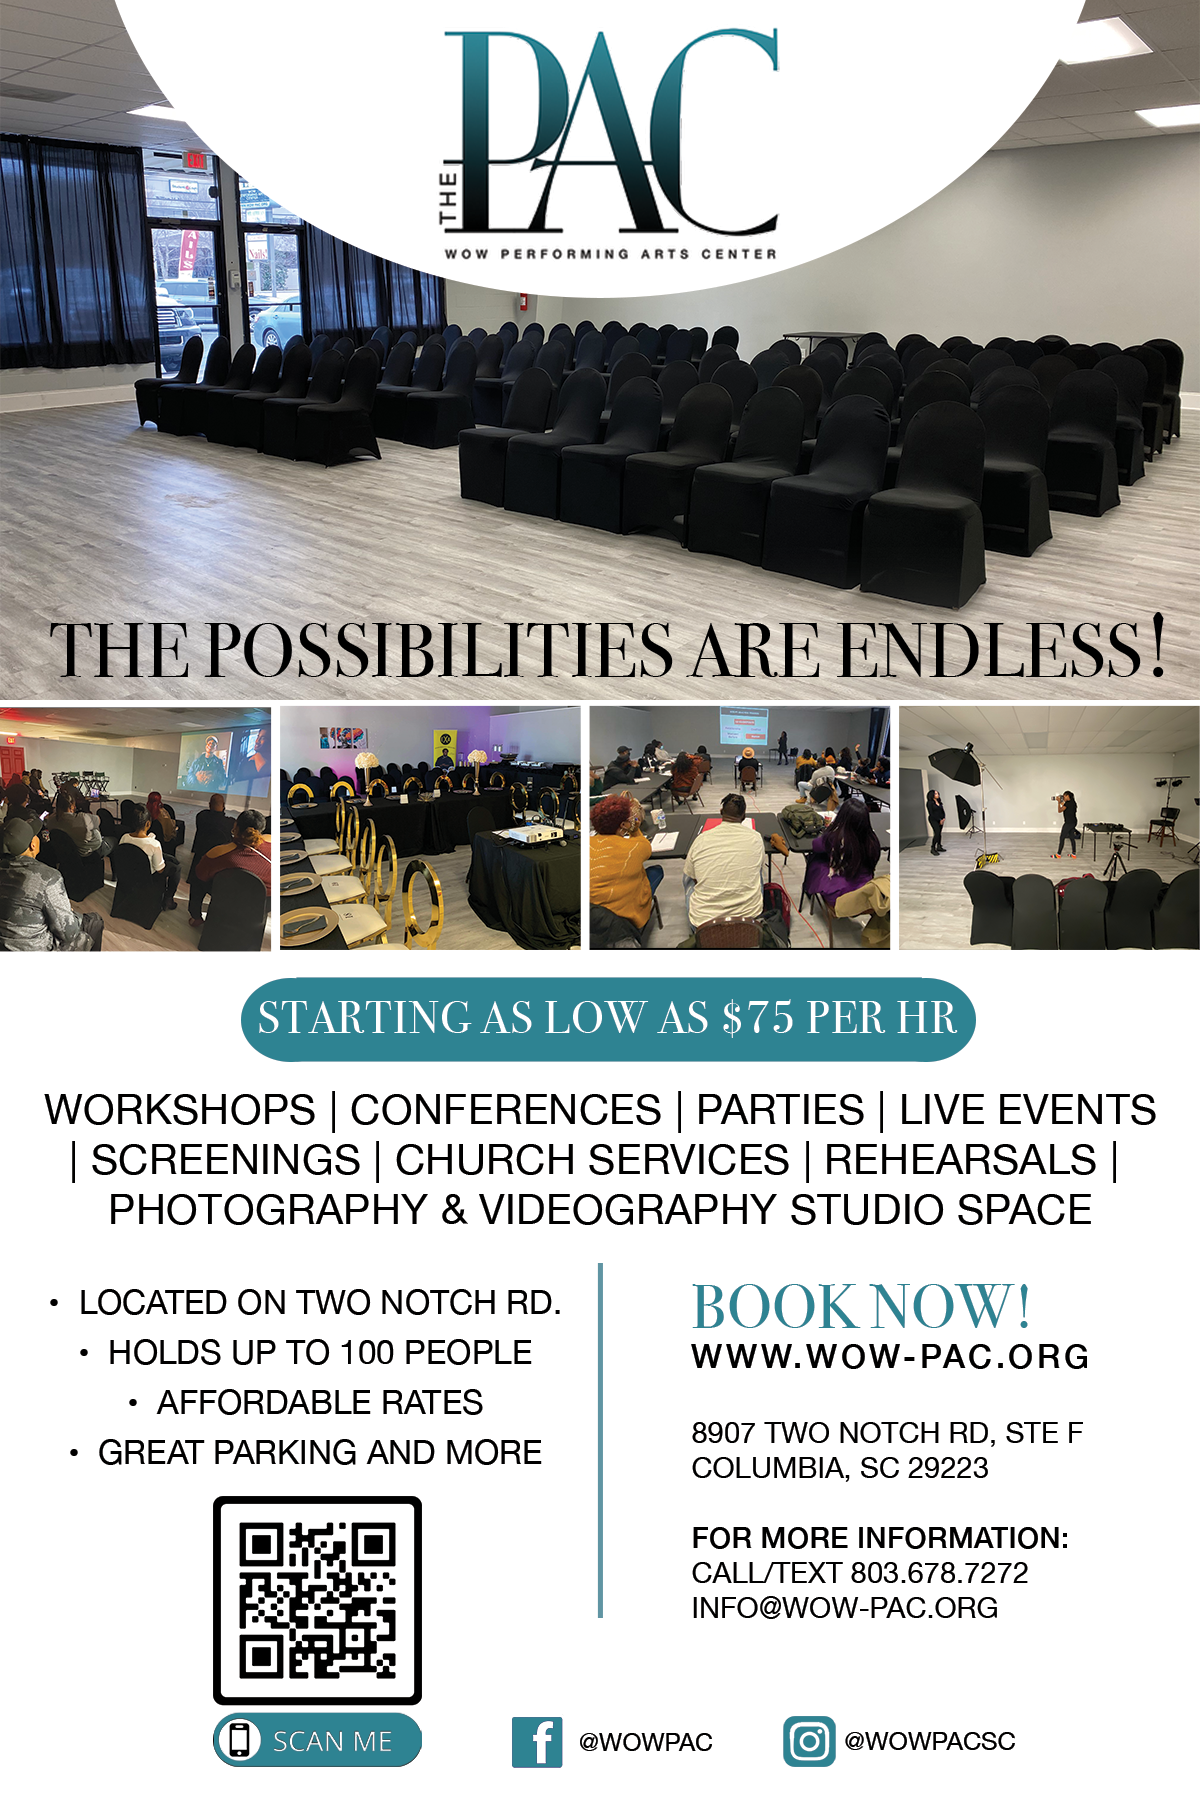 flyer for WOW Performing Arts Center. For information, call or text 803-678-7272 or email info@wow-pac.org.